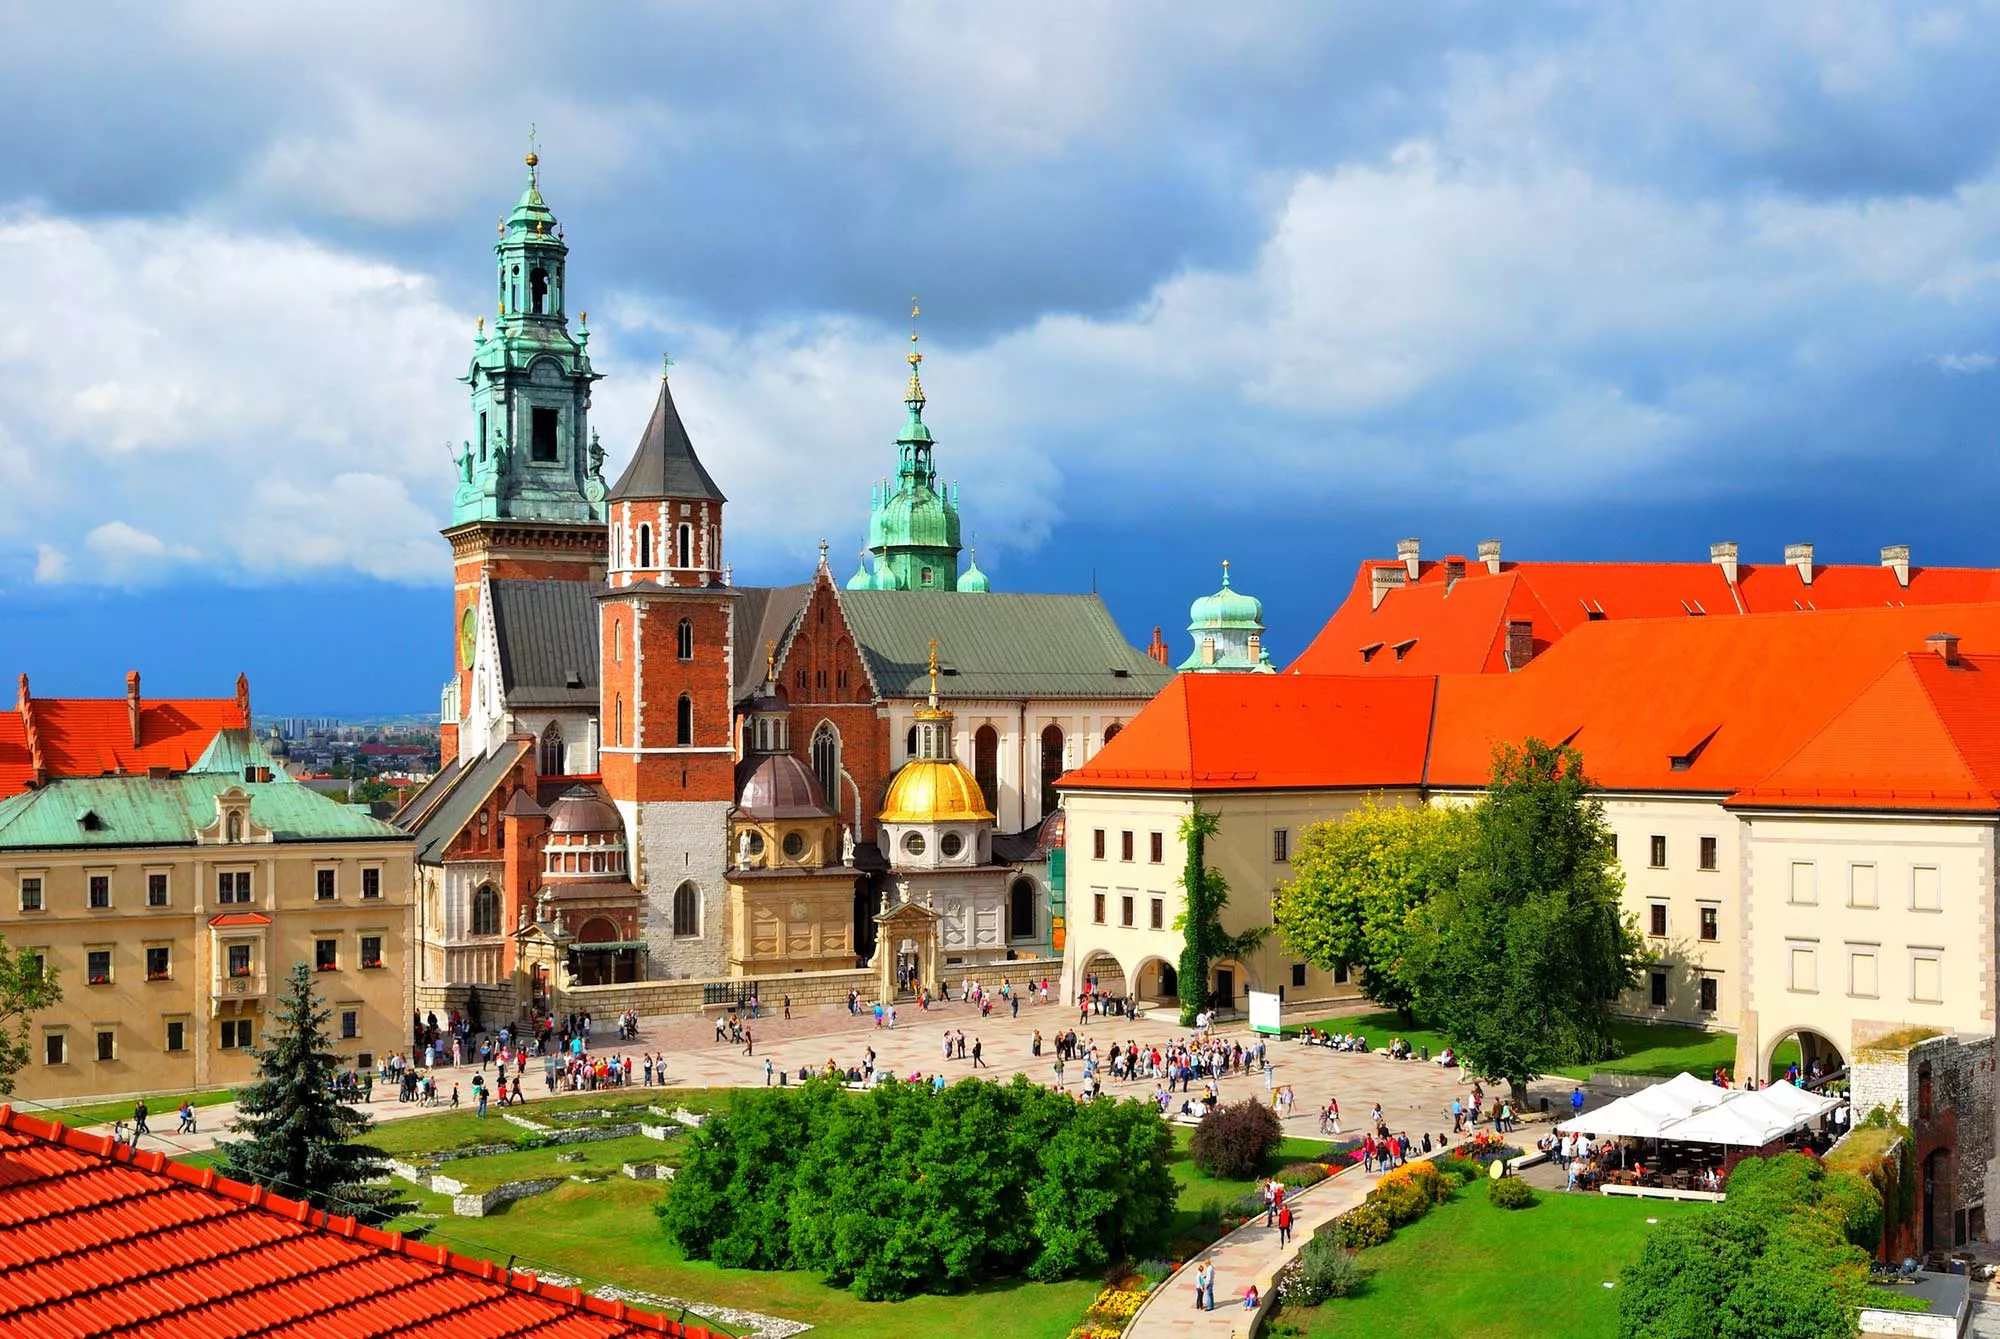 Wawel Castle in Poland, Europe | Castles - Rated 8.2